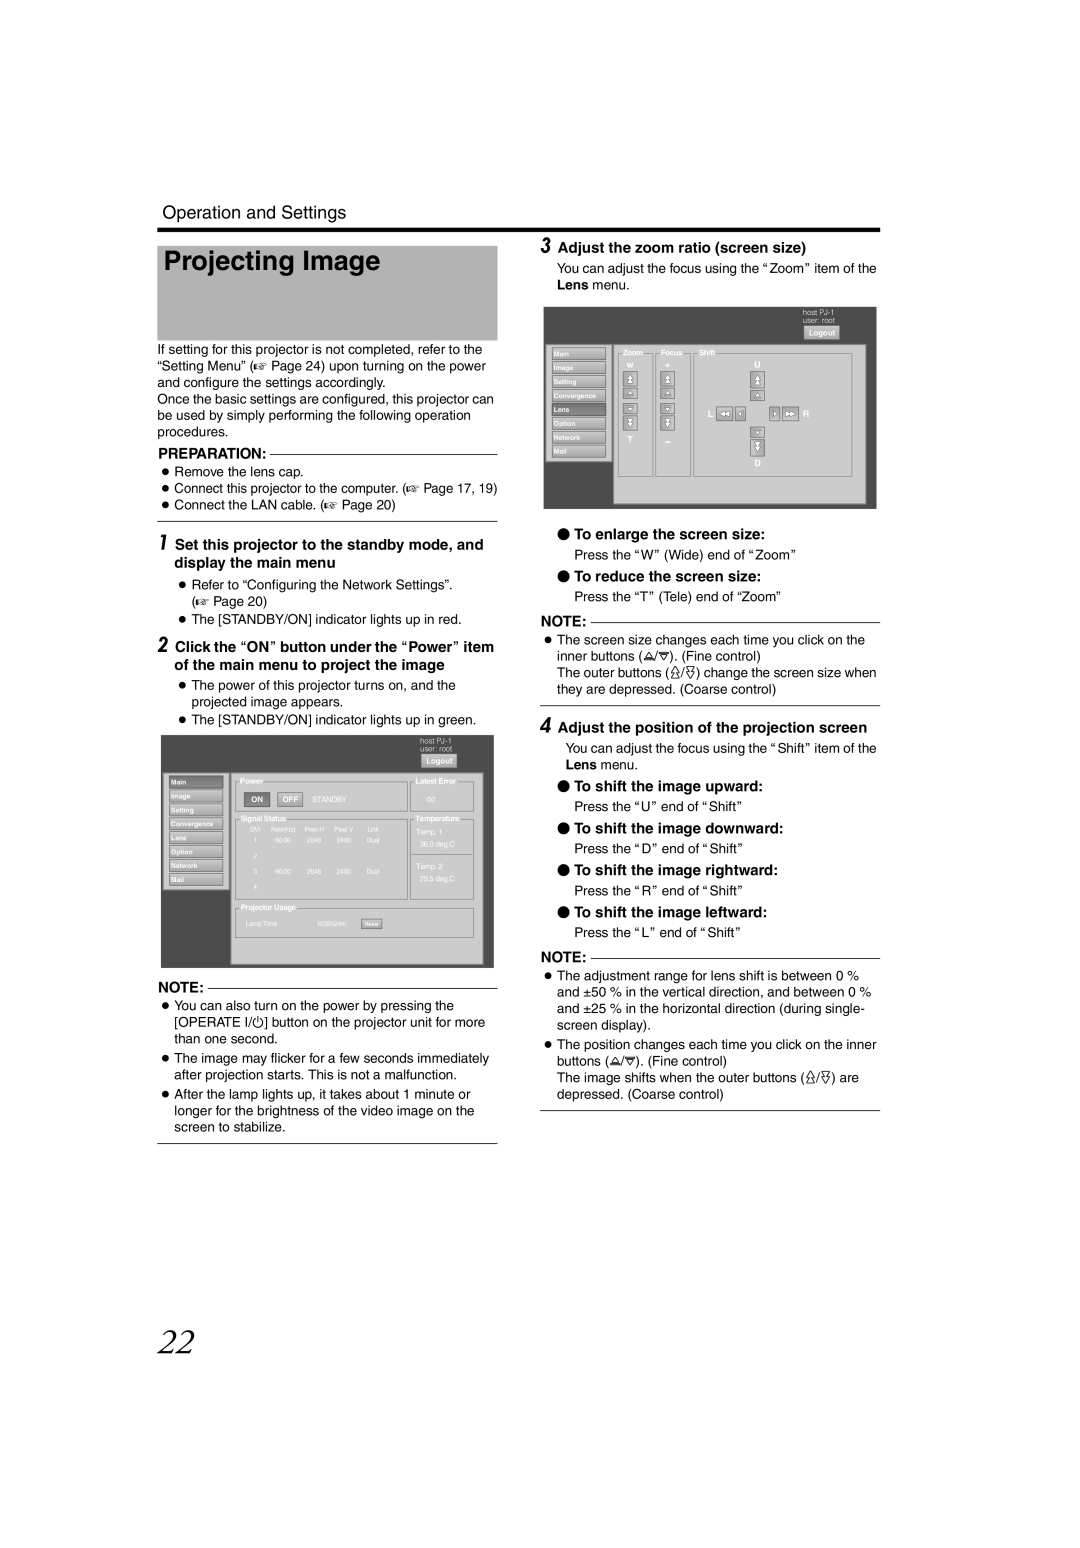 JVC DLA-SH4K instruction manual Projecting Image, Operation and Settings, Adjust the zoom ratio screen size, Preparation 